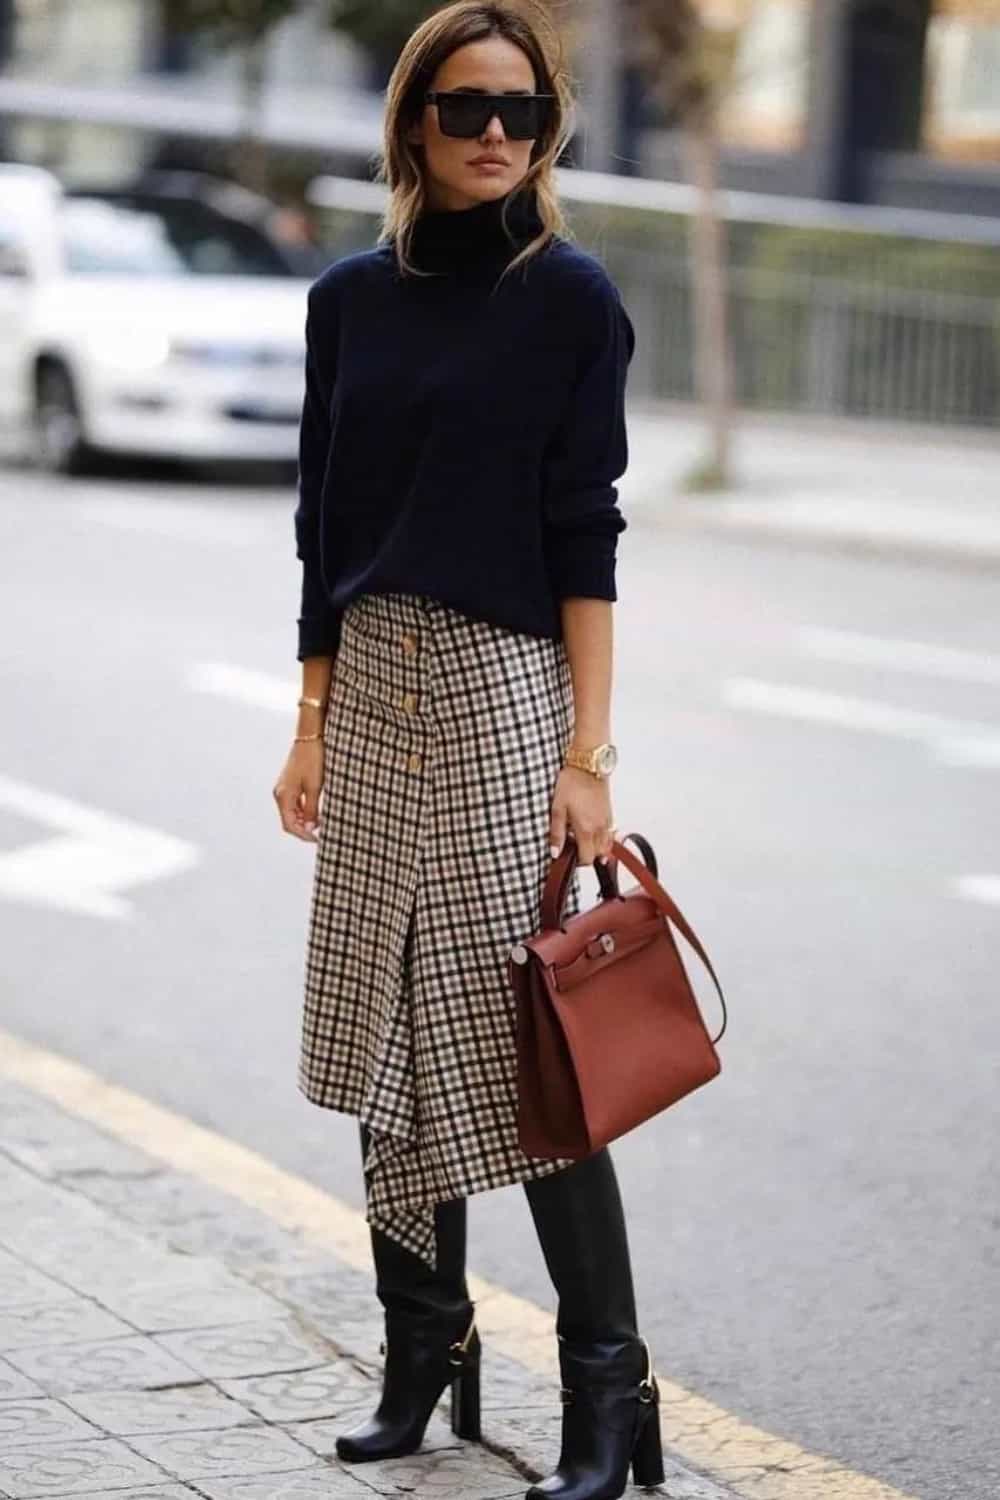 Black Turtleneck Sweater outfit with plaid skirt